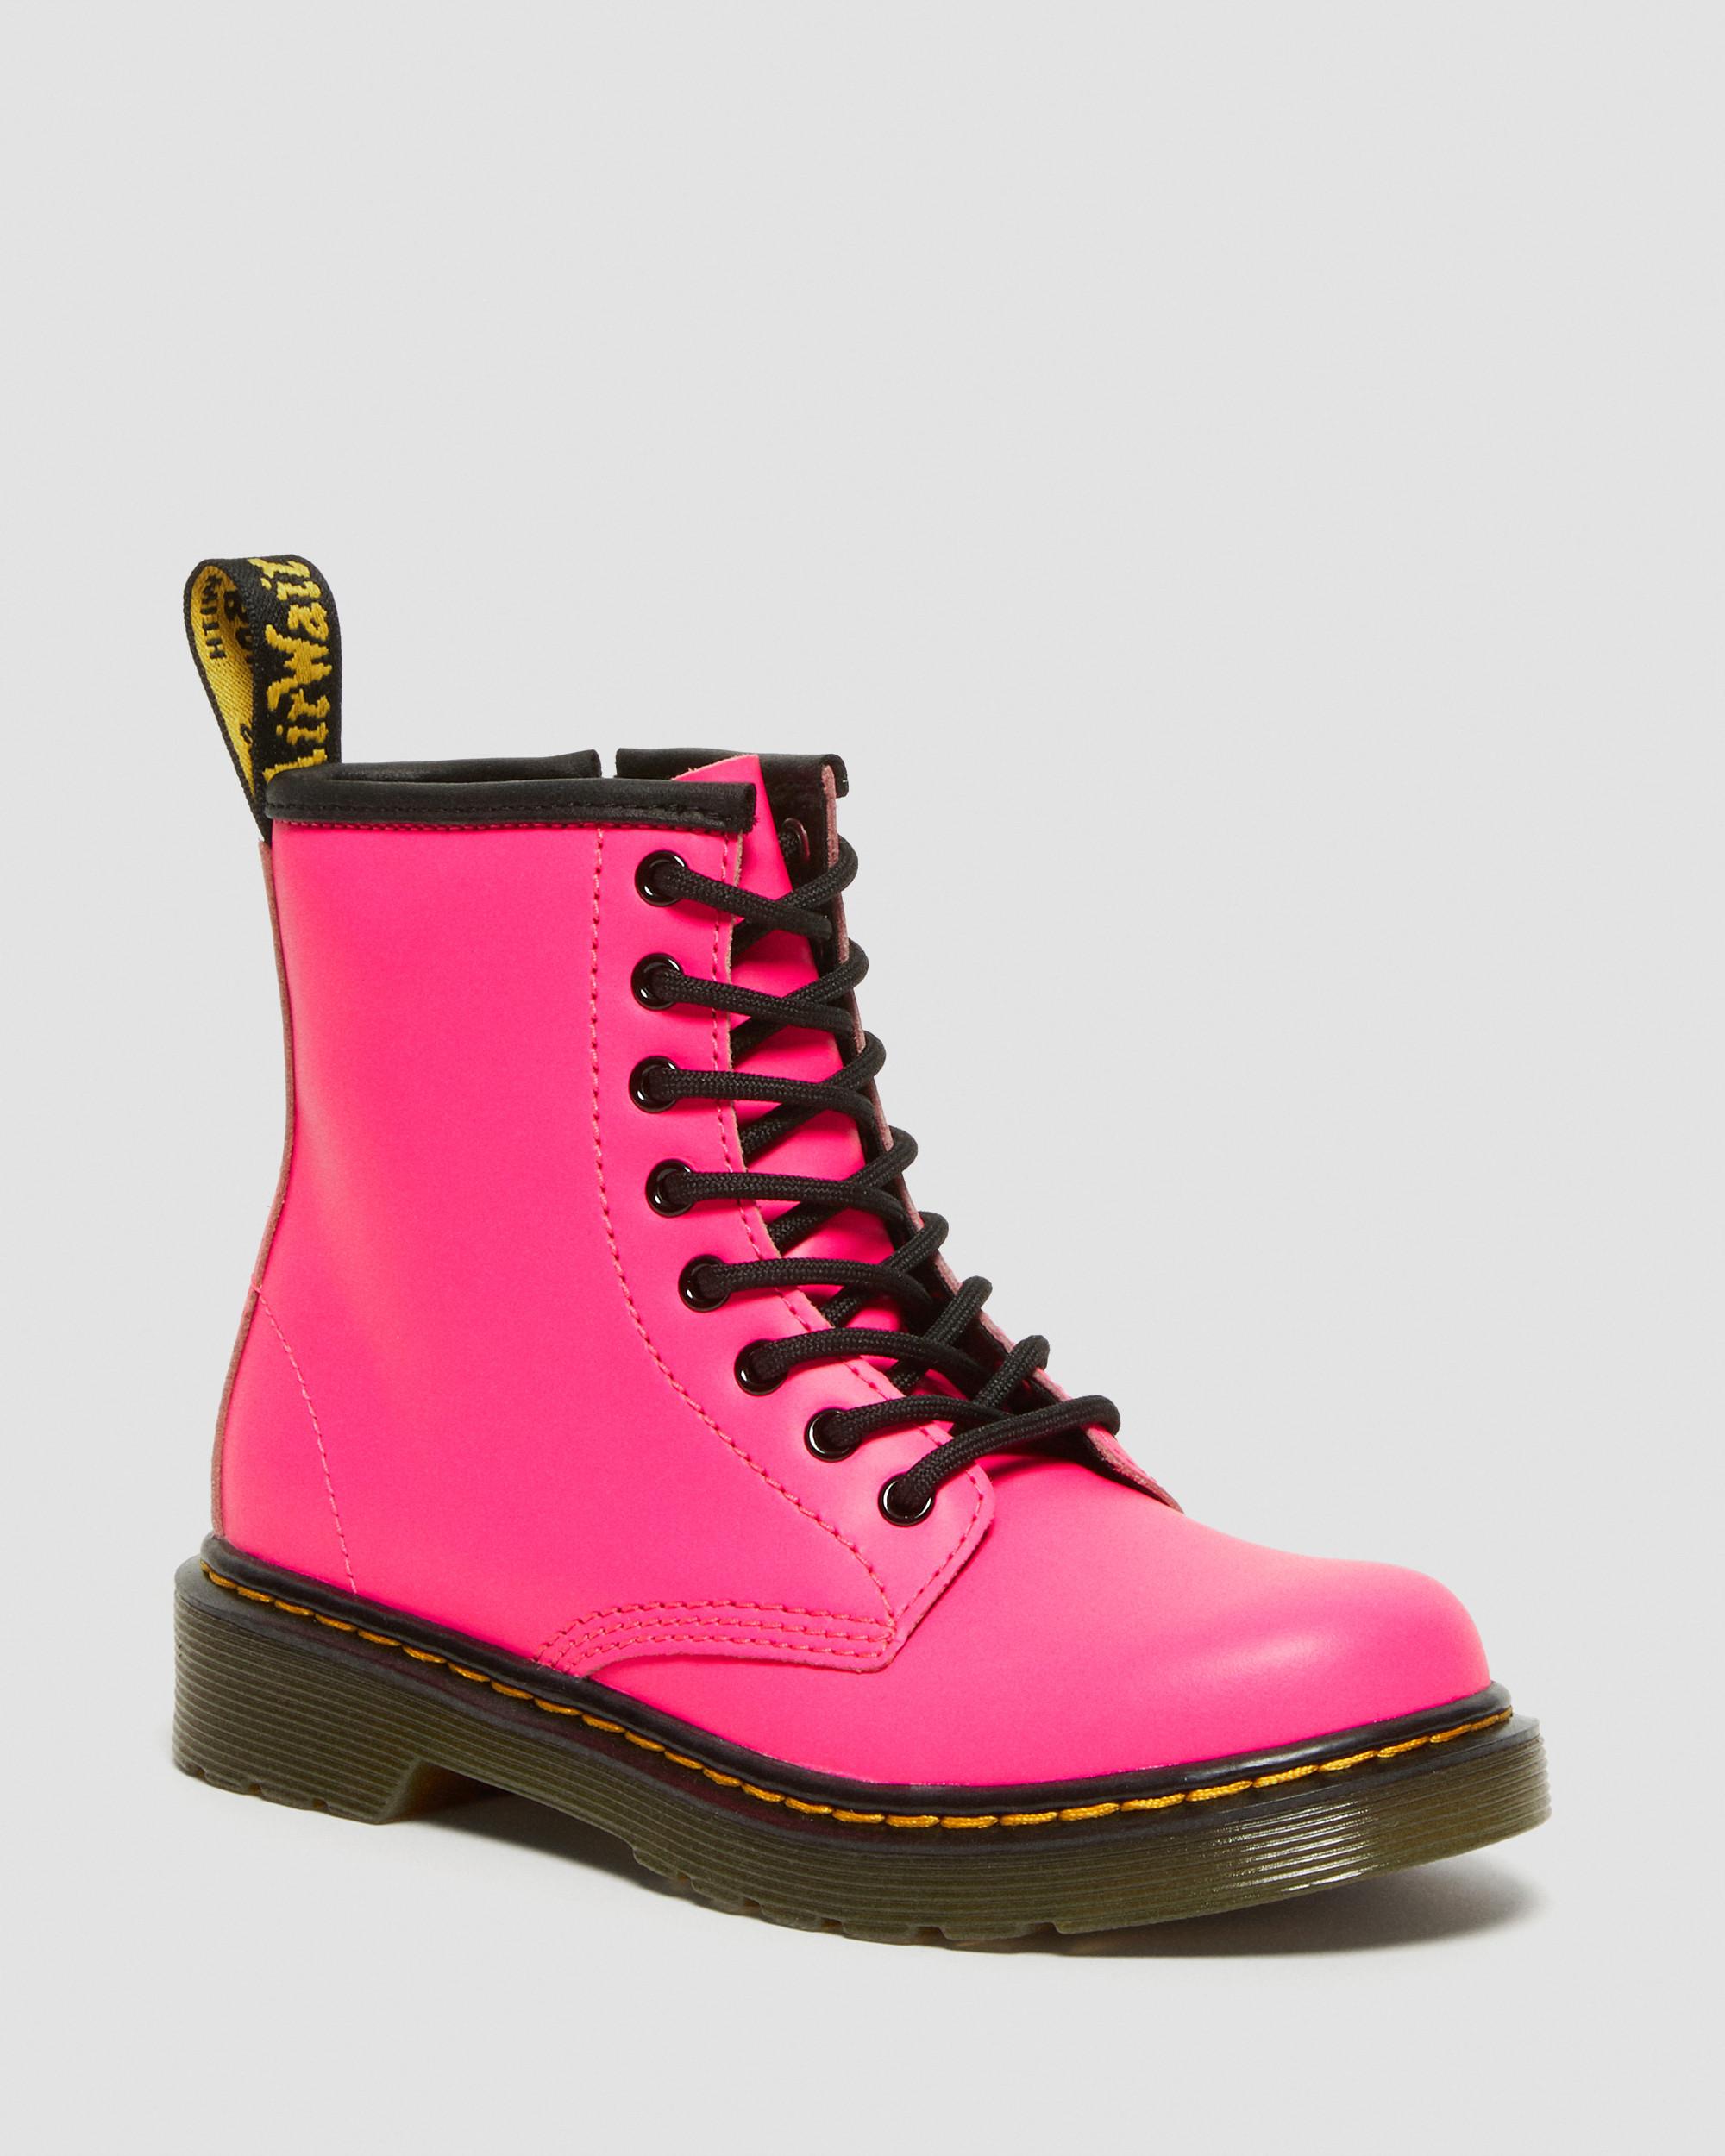 Junior 1460 Softy T Leather Lace Up Boots Dr. Martens